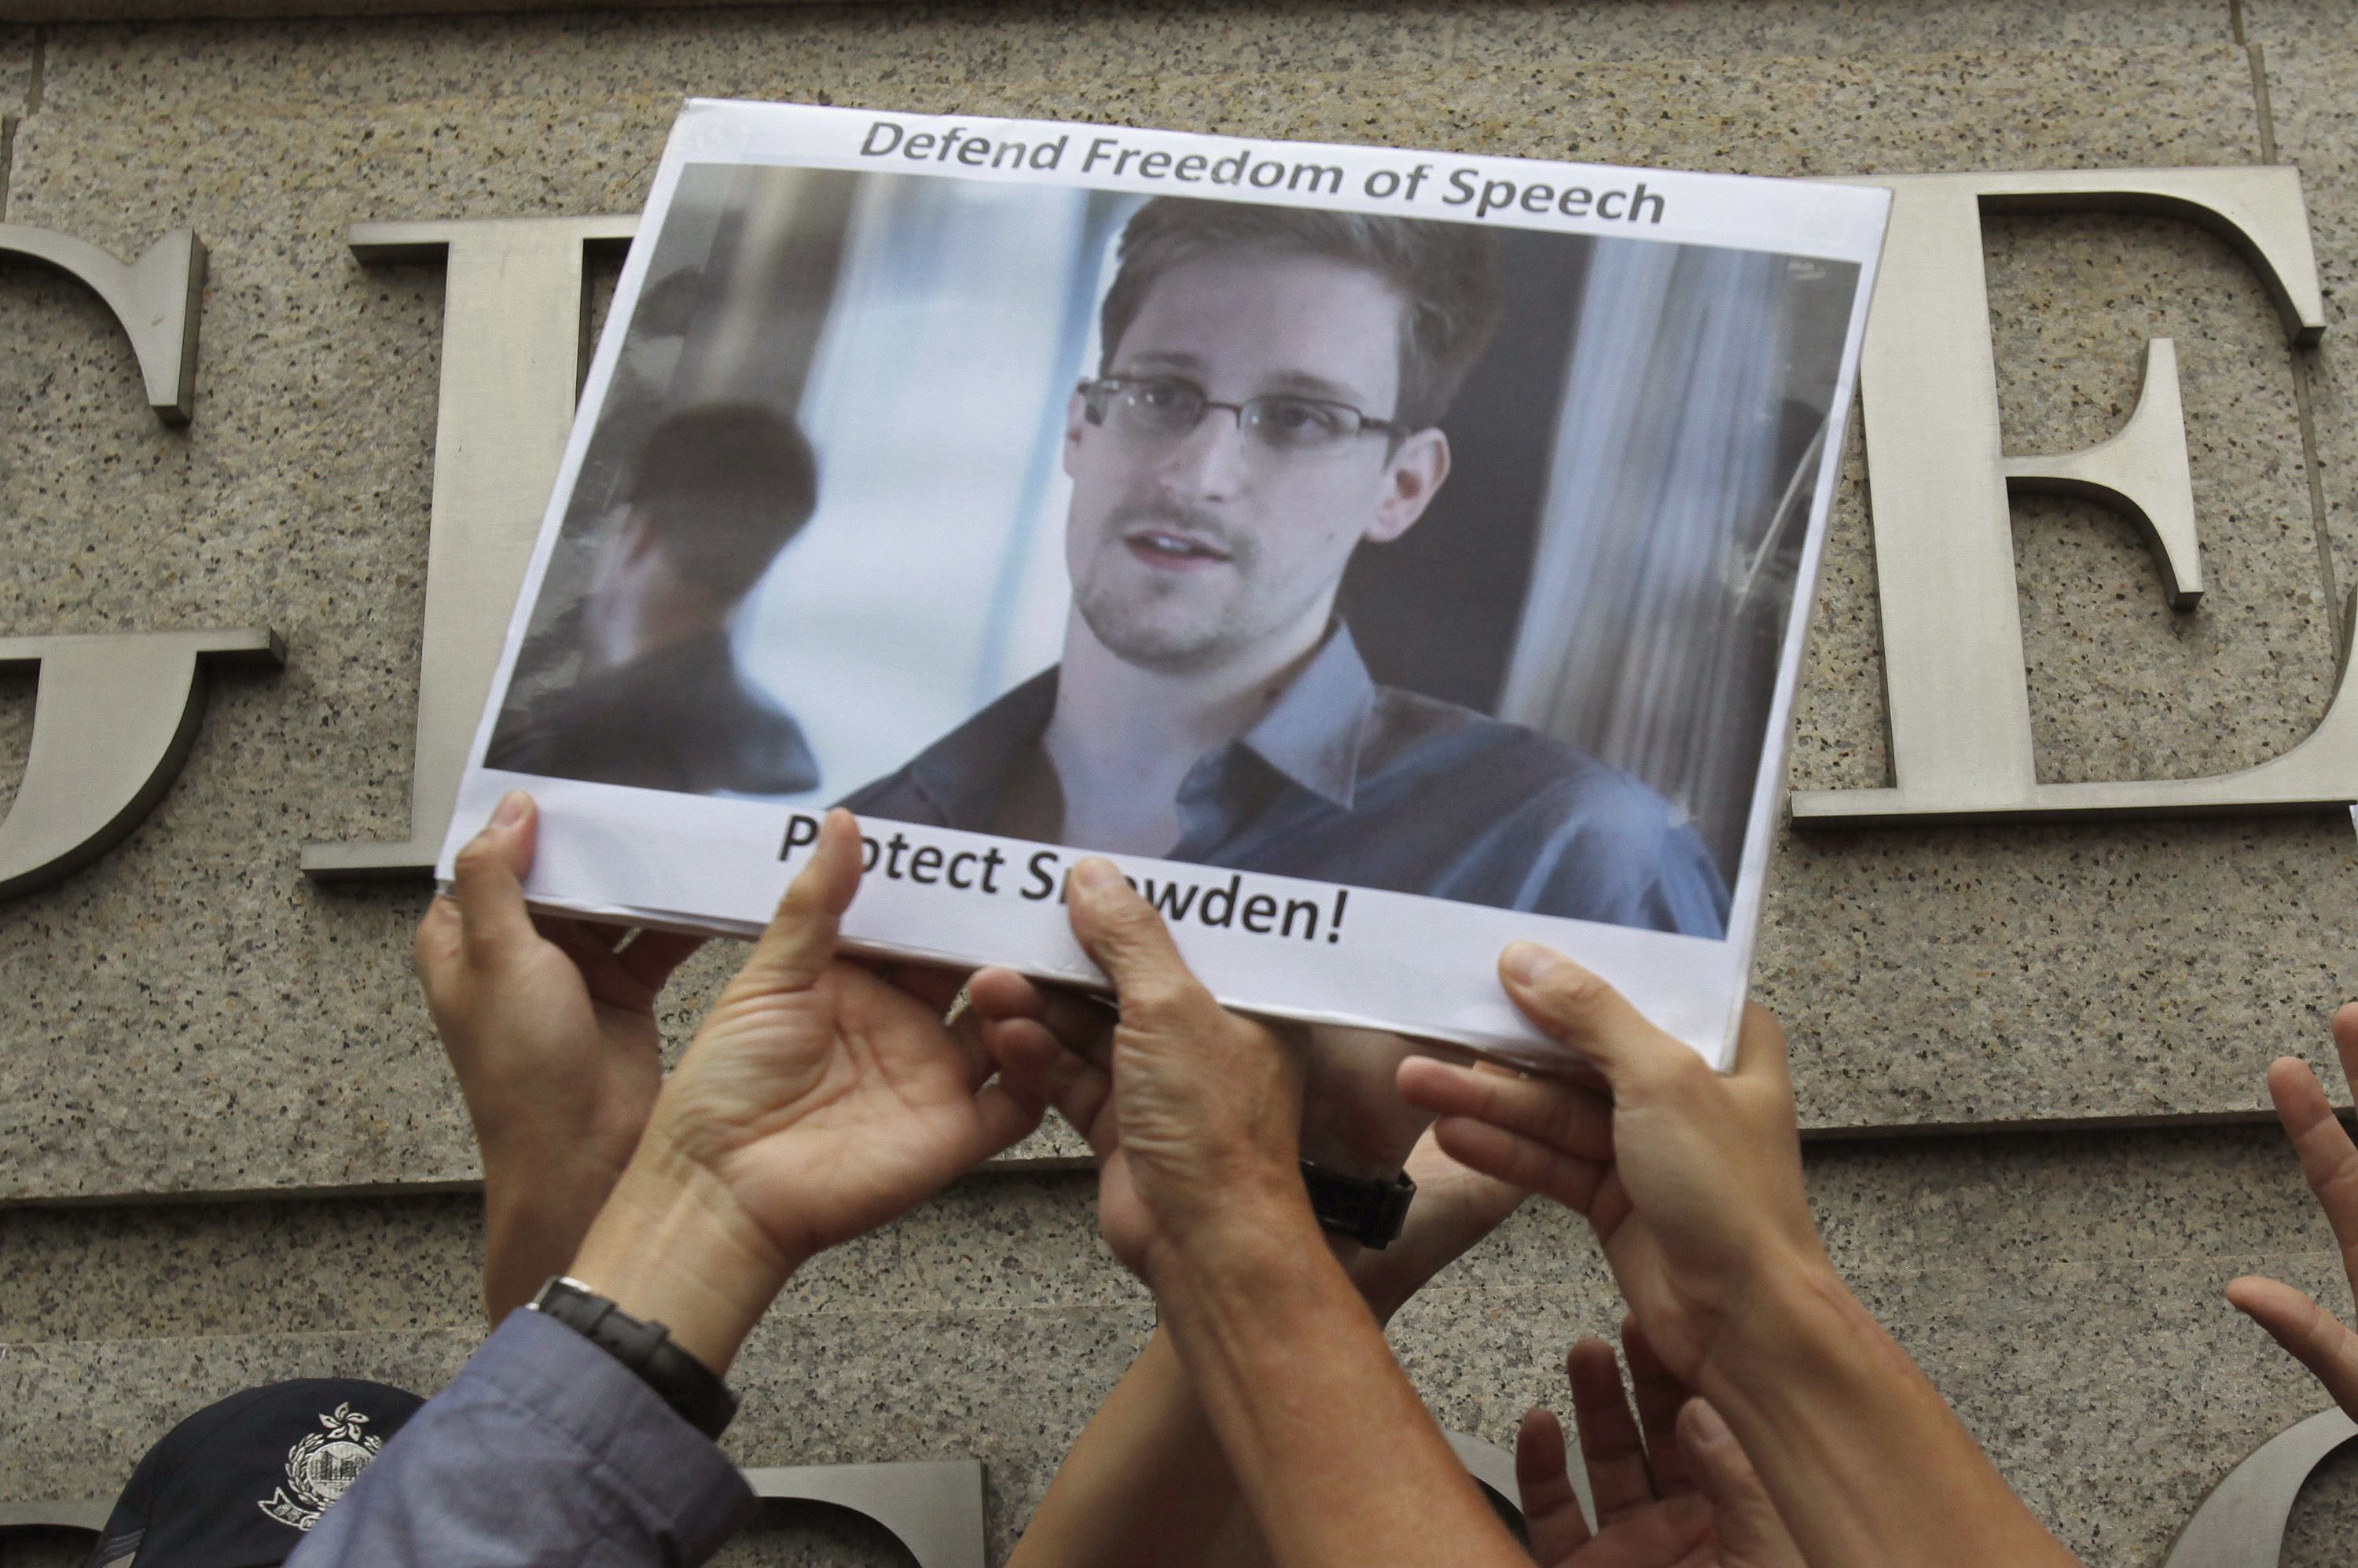 Snowden leaves Hong Kong, reportedly bound for Russia